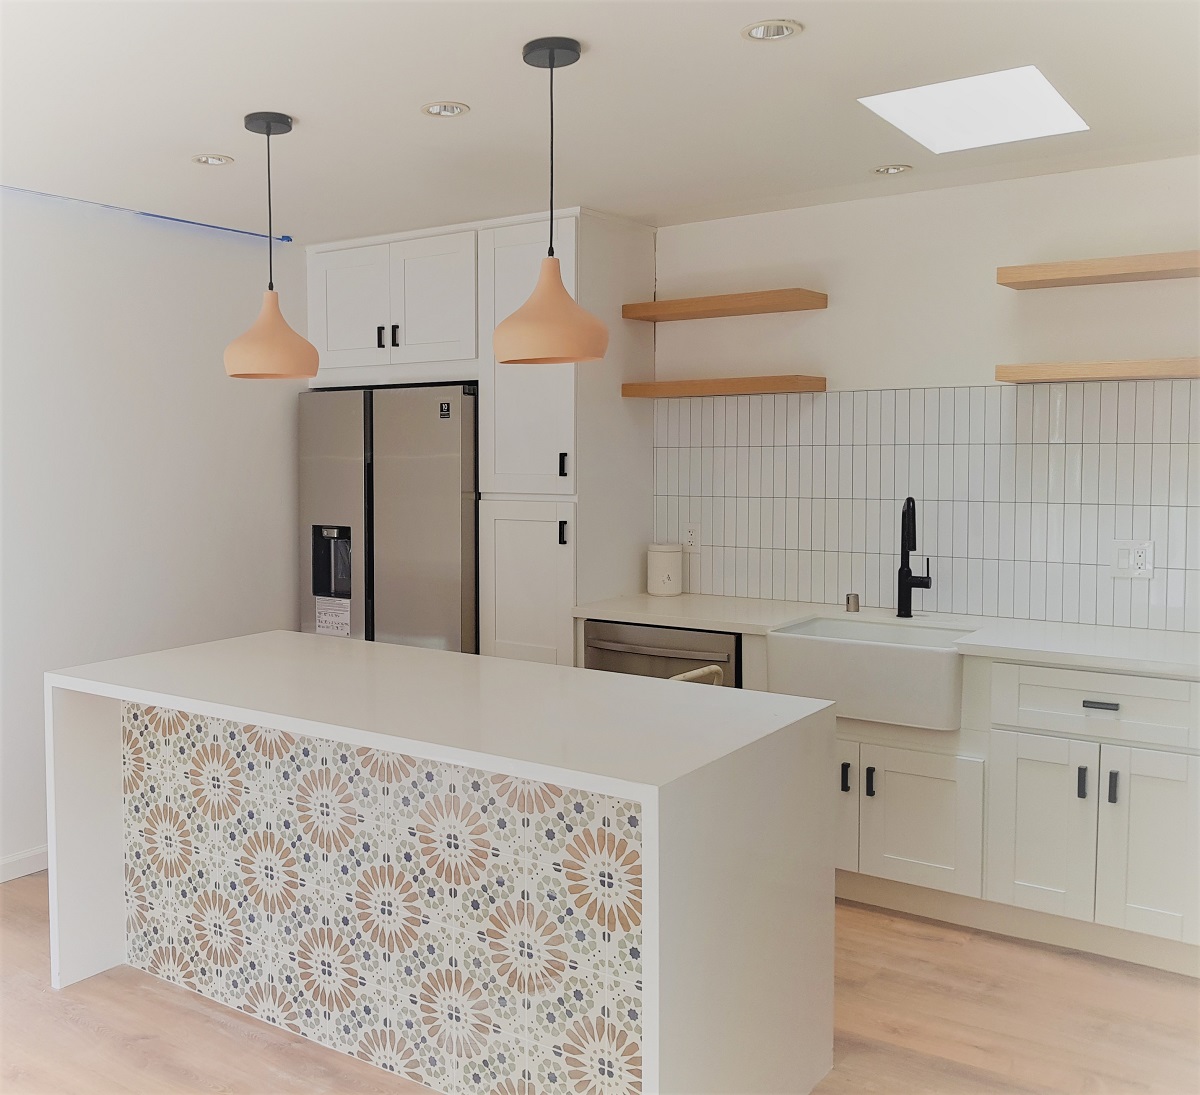 Remodeling Contractor Near San Diego- Optimal Home Remodeling & Design